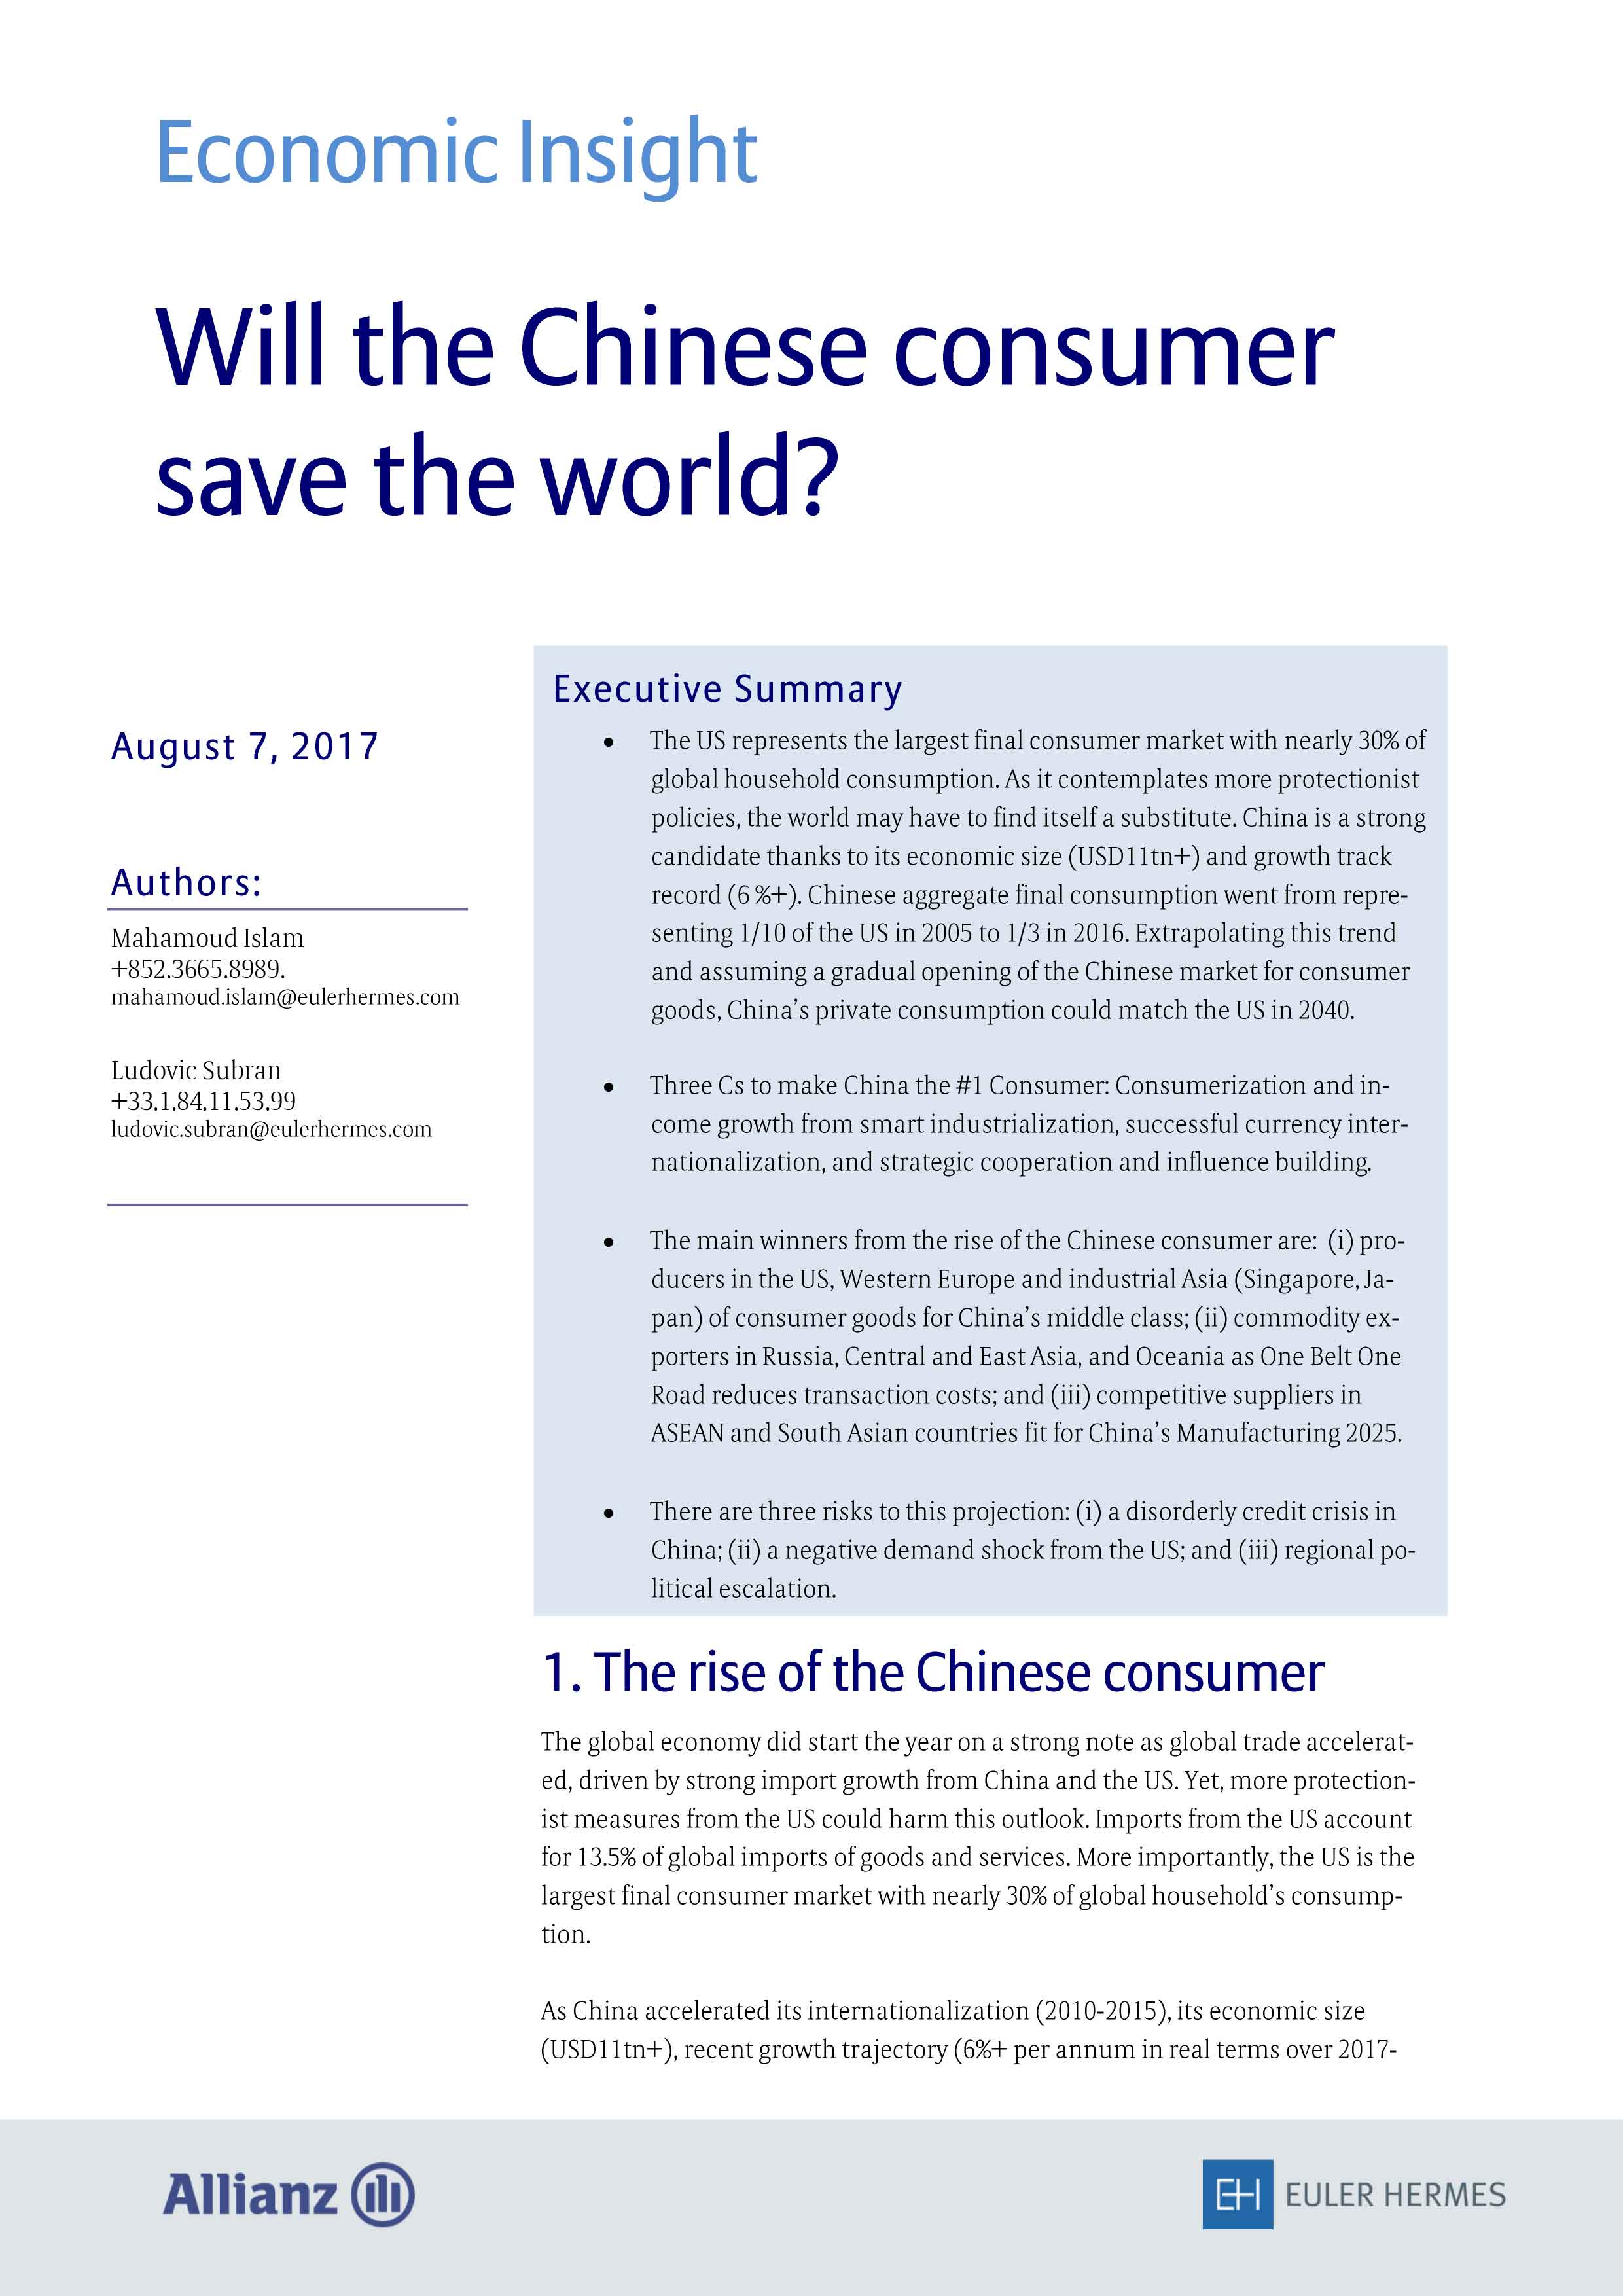 Will the Chinese consumer save the world?